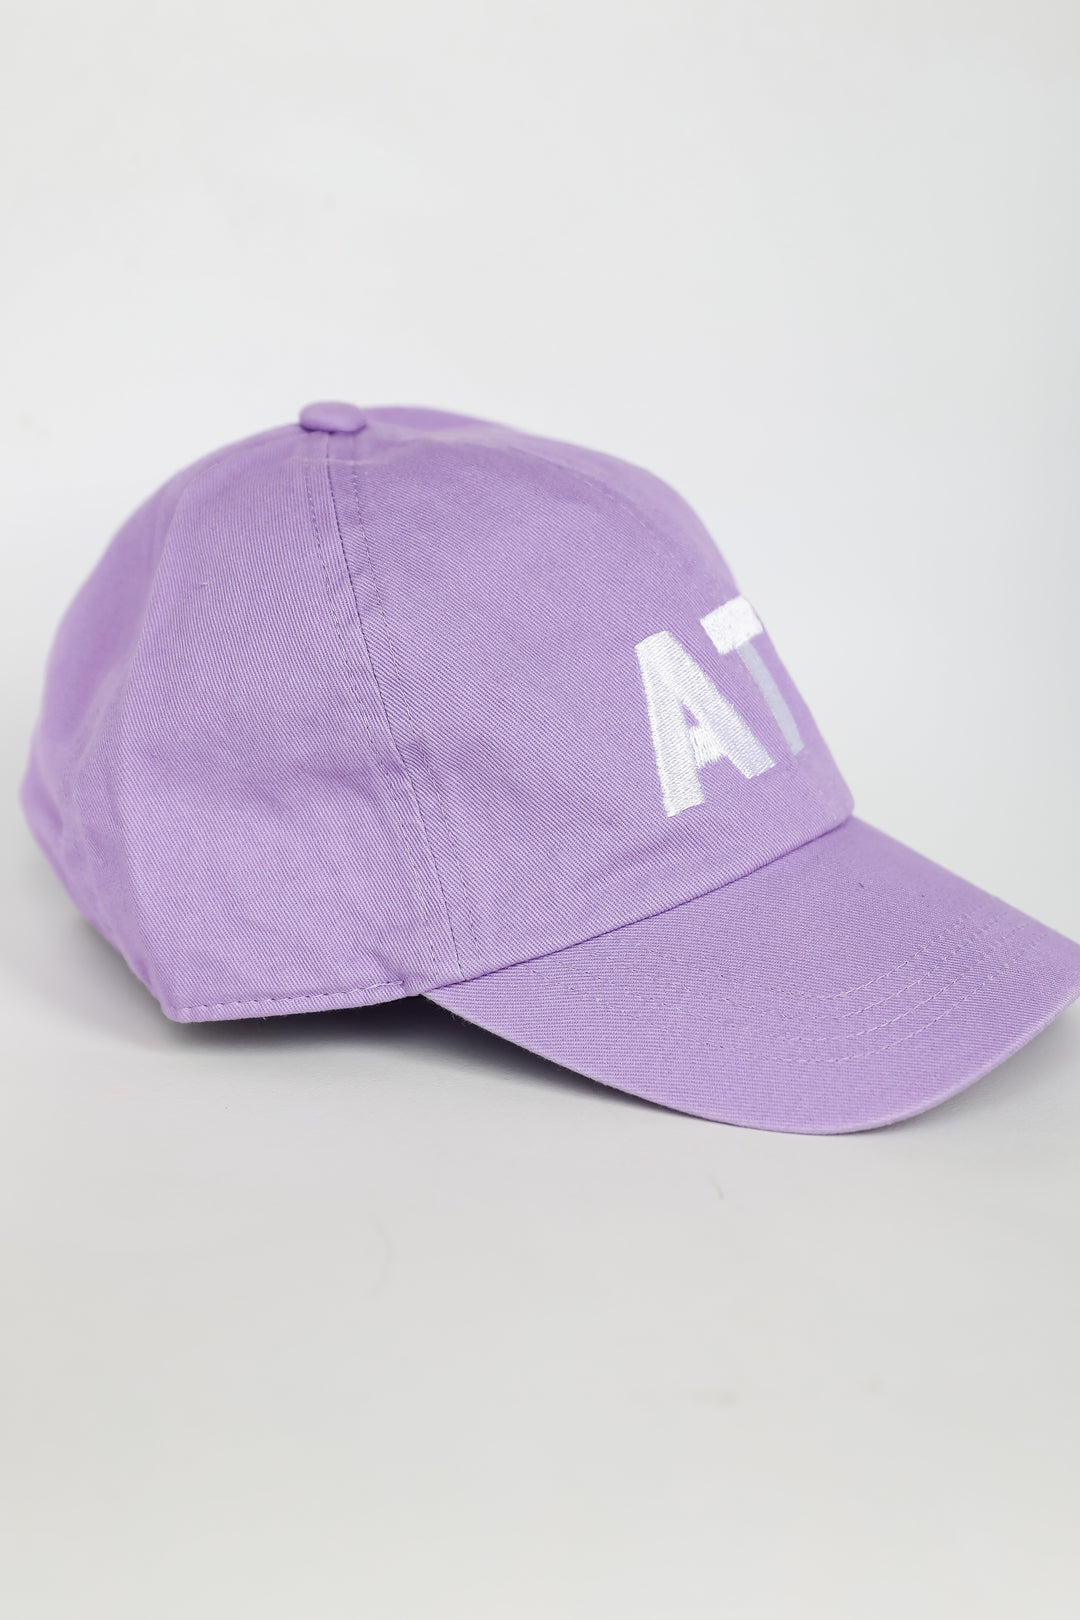 ATL Embroidered Hat